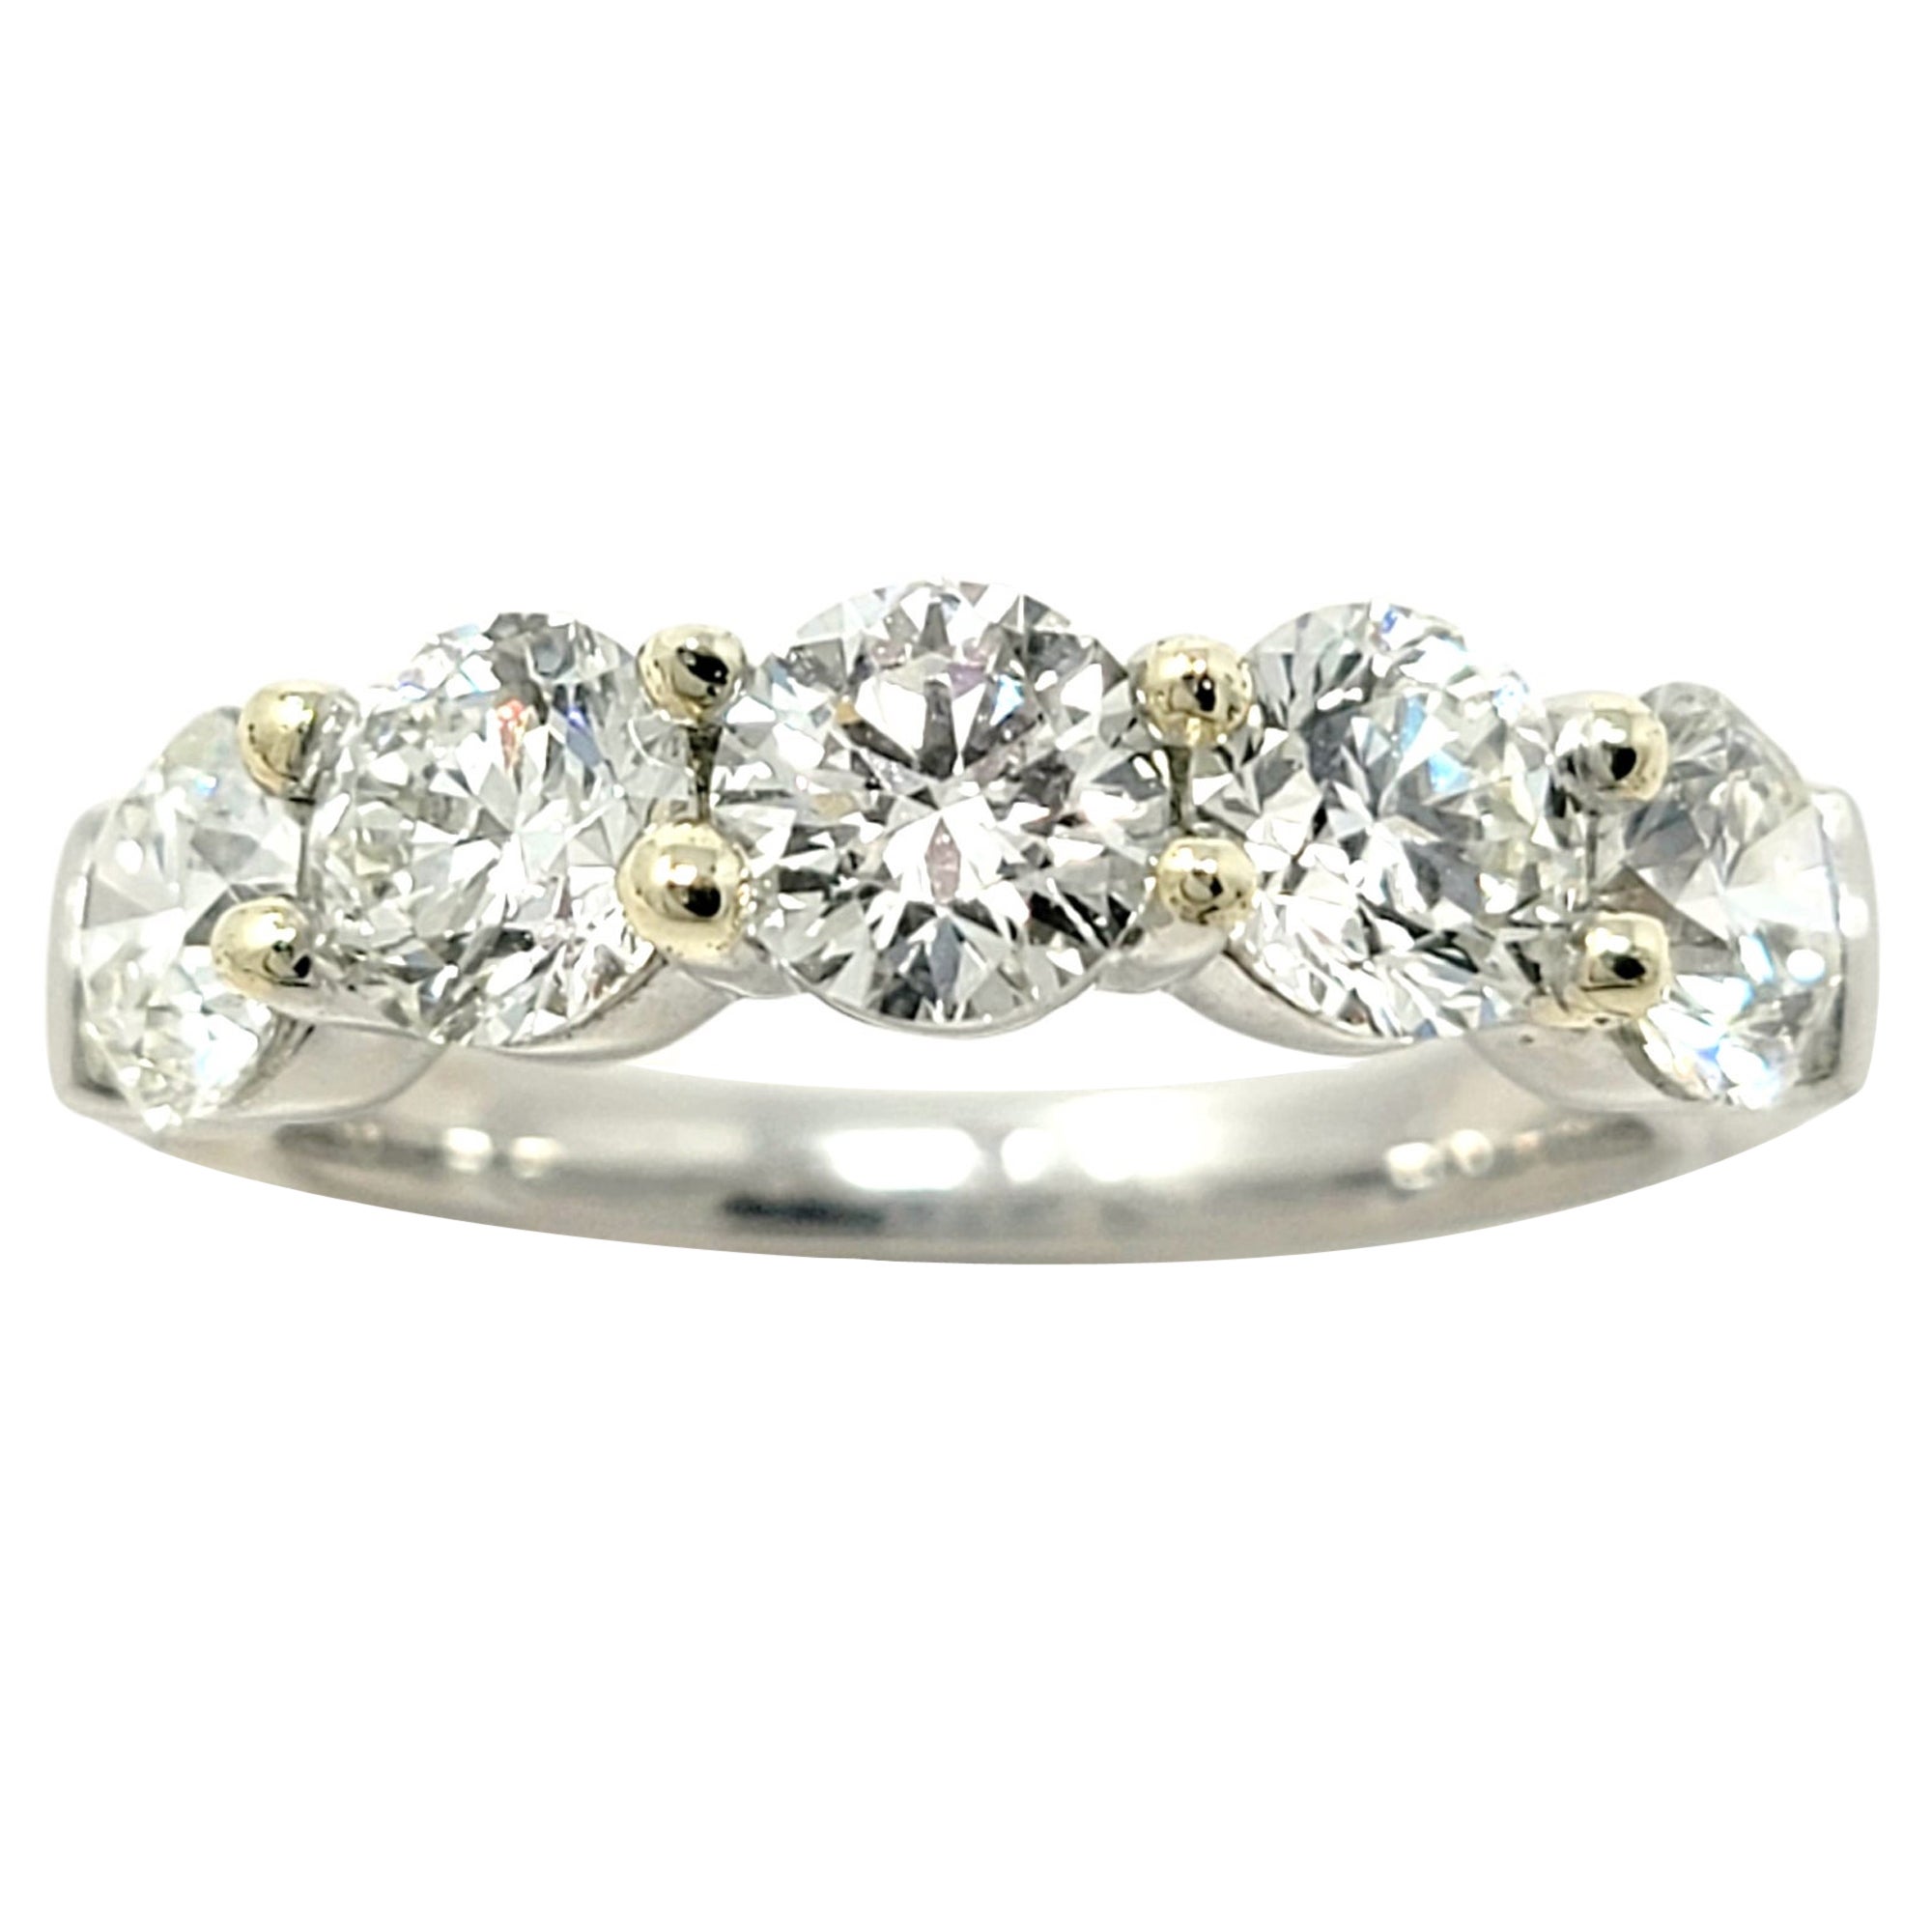 3.00 Carats Total 5 Round Diamond Semi-Eternity Band Ring in Platinum and Gold